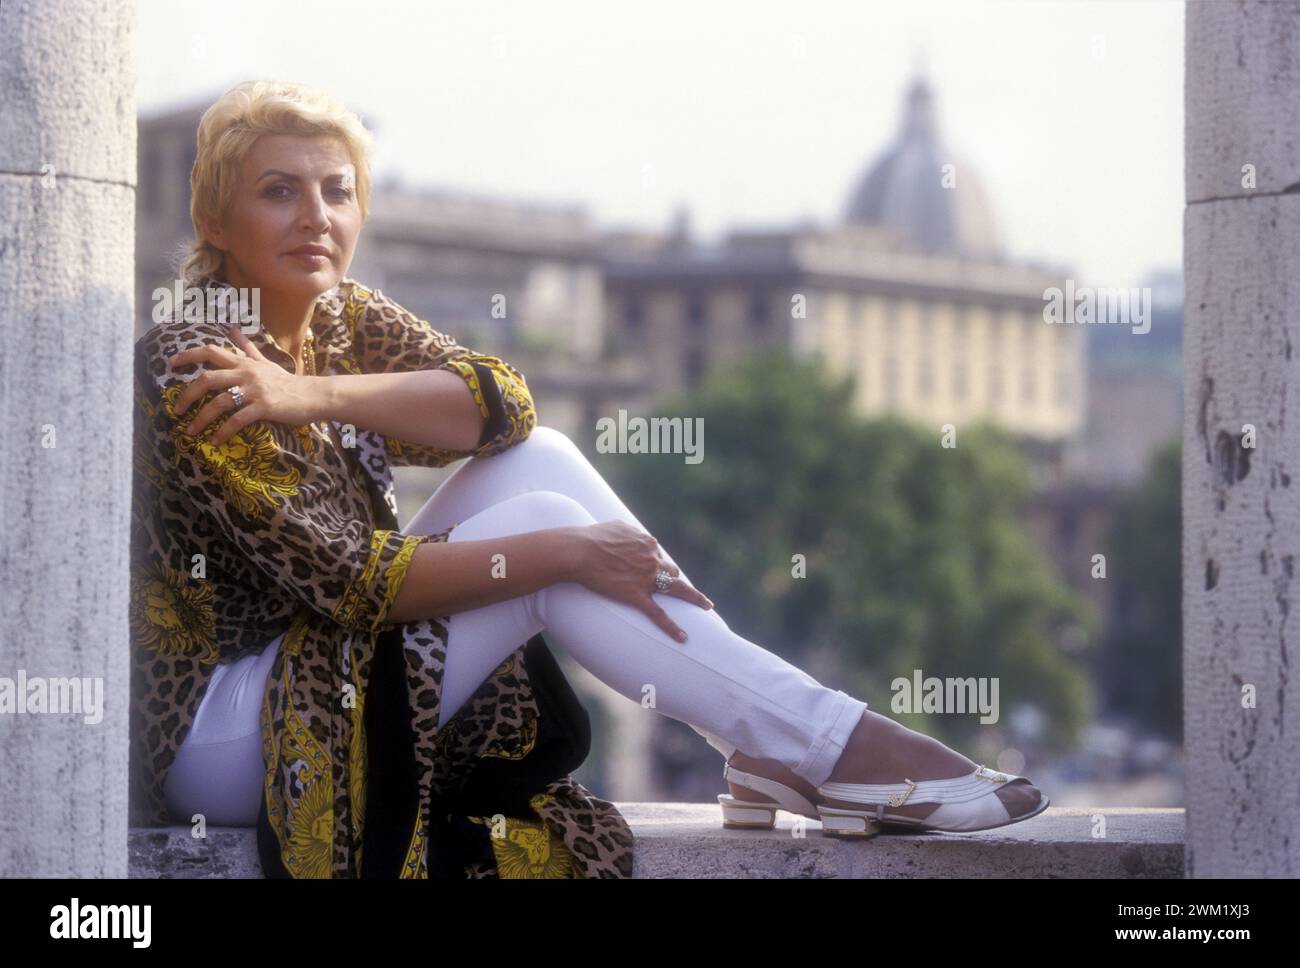 MME4741867 Rome, Castel Sant'Angelo, 1998. Ukrainian soprano Maria Guleghina -main protagonist in the opera Tosca at the Olynpic Stadium- poses at Castel Sant'Angelo where takes place the last act of the opera/Roma, 1998. Il soprano Maria Guleghina, protagonista dell'opera Tosca allo Stadio Olimpico, ritratta a a Castel Sant'Angelo dove si svolge l'ultimo atto dell'opera -; (add.info.: Rome, Castel Sant'Angelo, 1998. Ukrainian soprano Maria Guleghina -main protagonist in the opera Tosca at the Olynpic Stadium- poses at Castel Sant'Angelo where takes place the last act of the opera/Roma Stock Photo